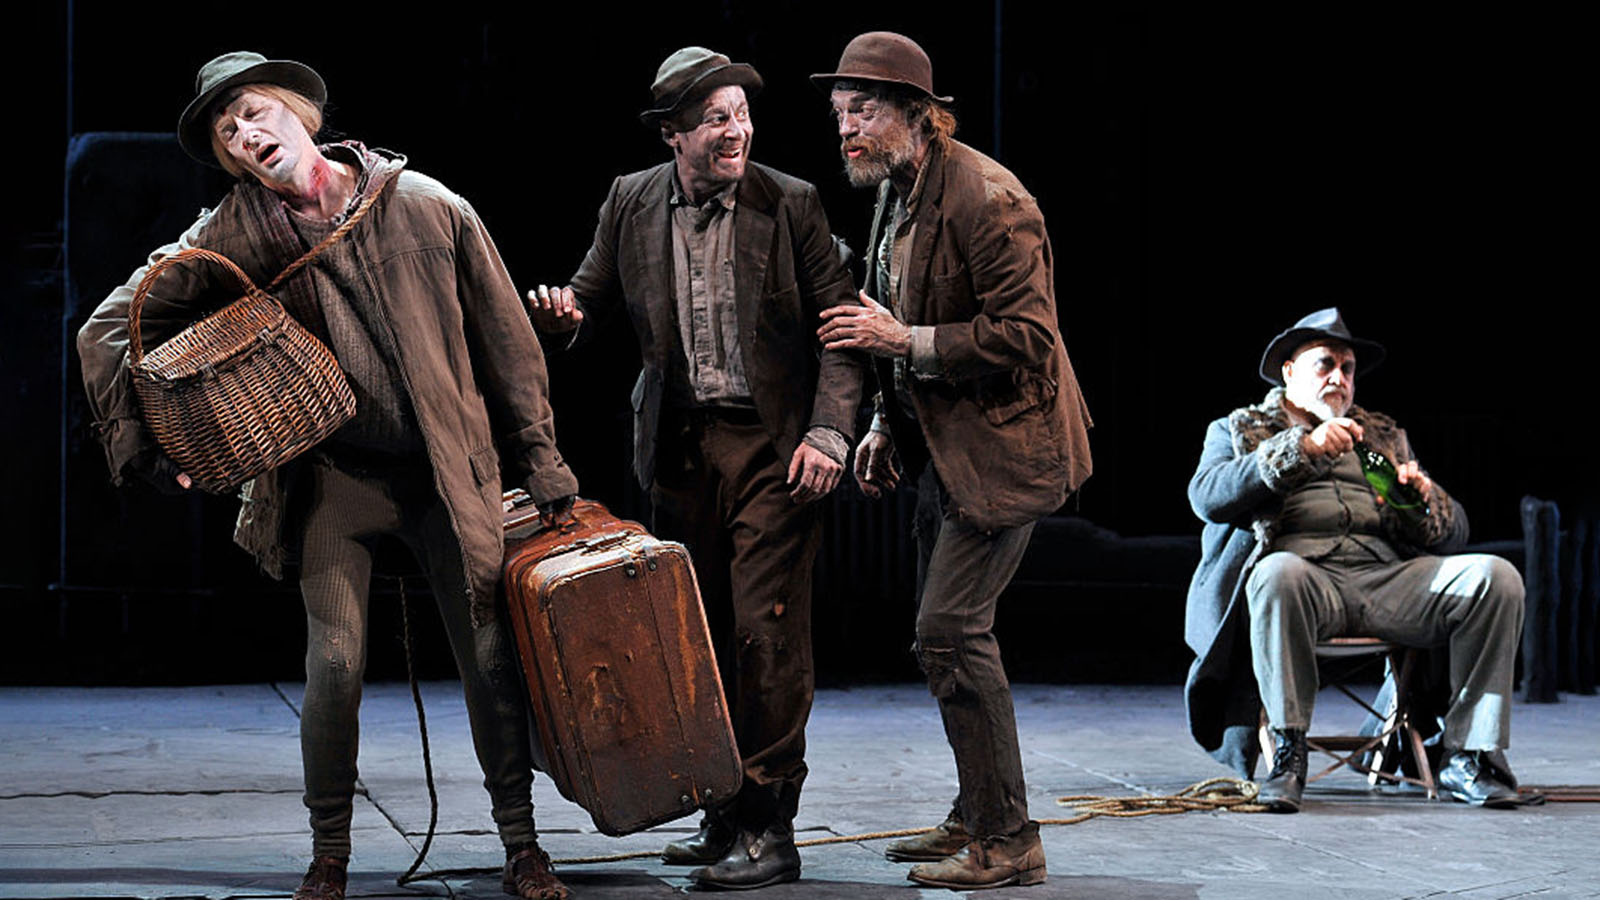 example of farce Waiting for Godot